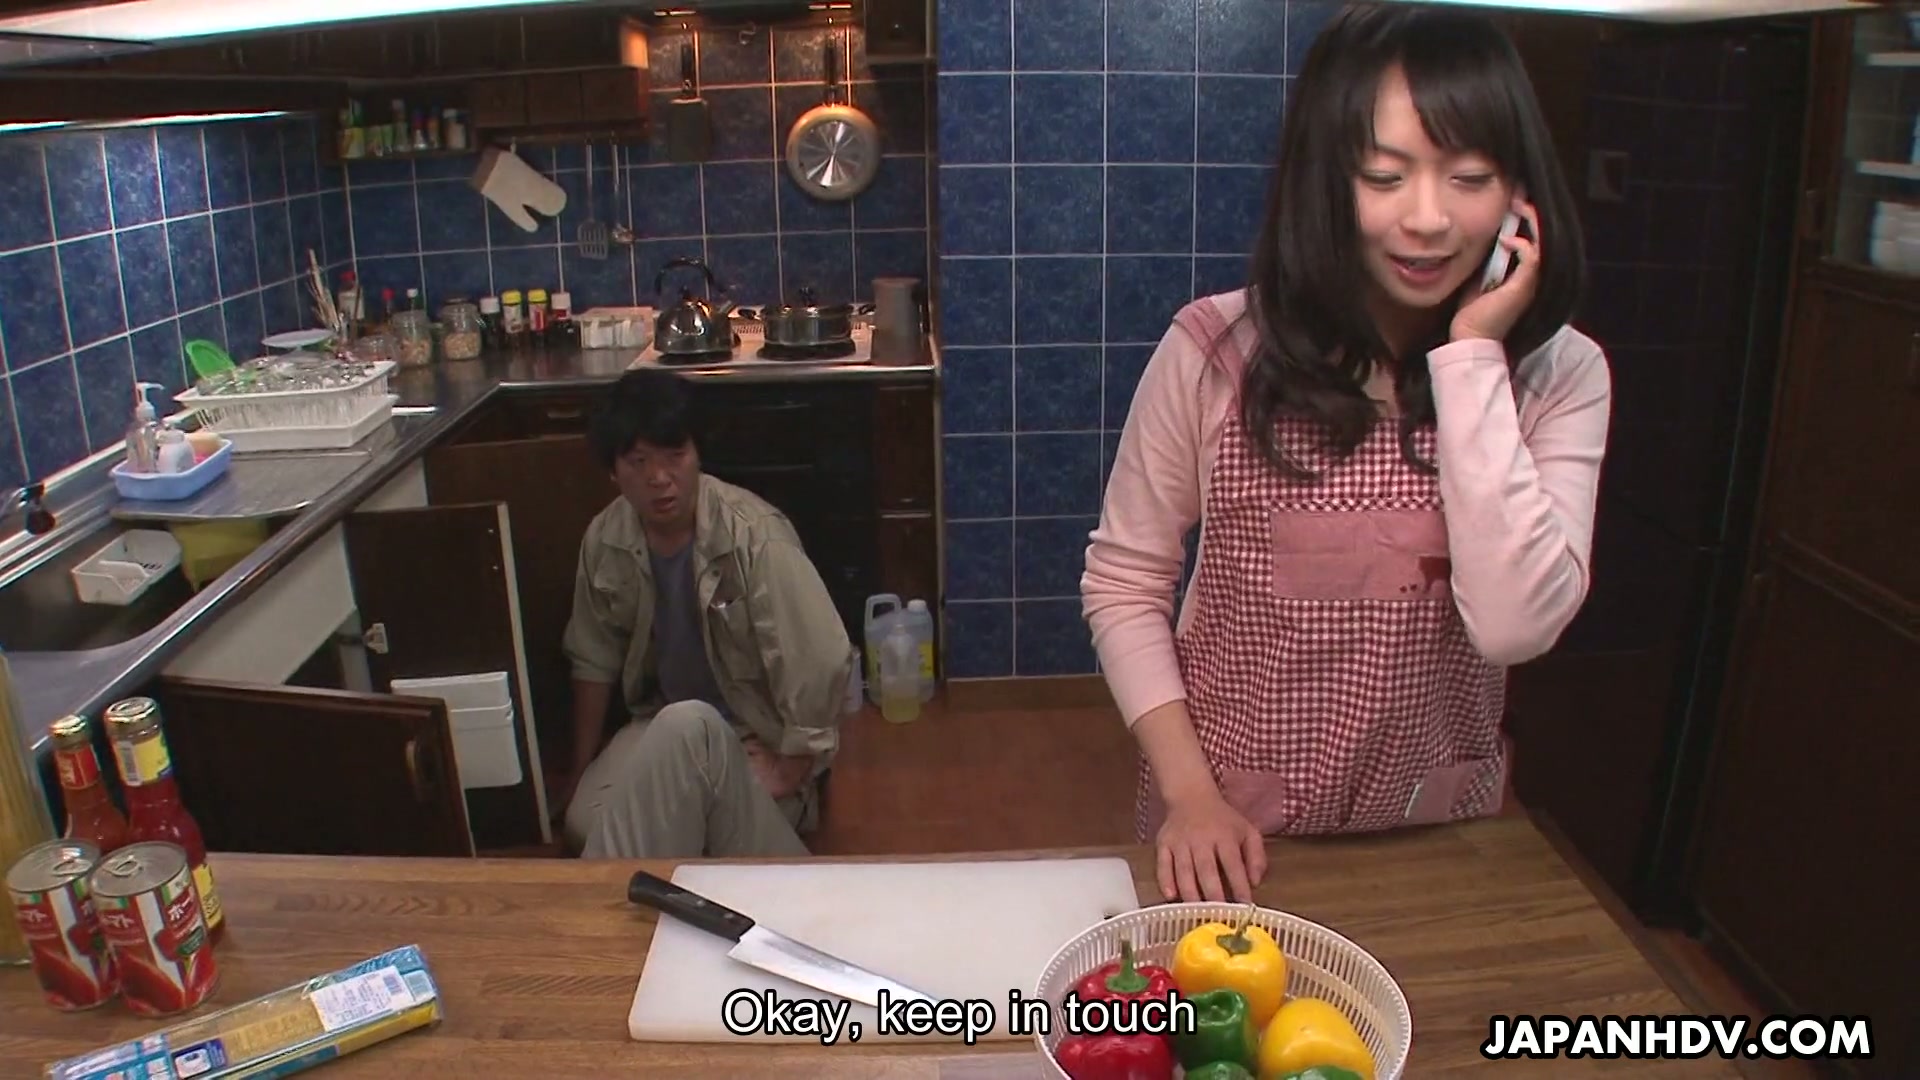 A plumber feeds a lonely Japanese housewife Nozomi Hazuki with his dick pic